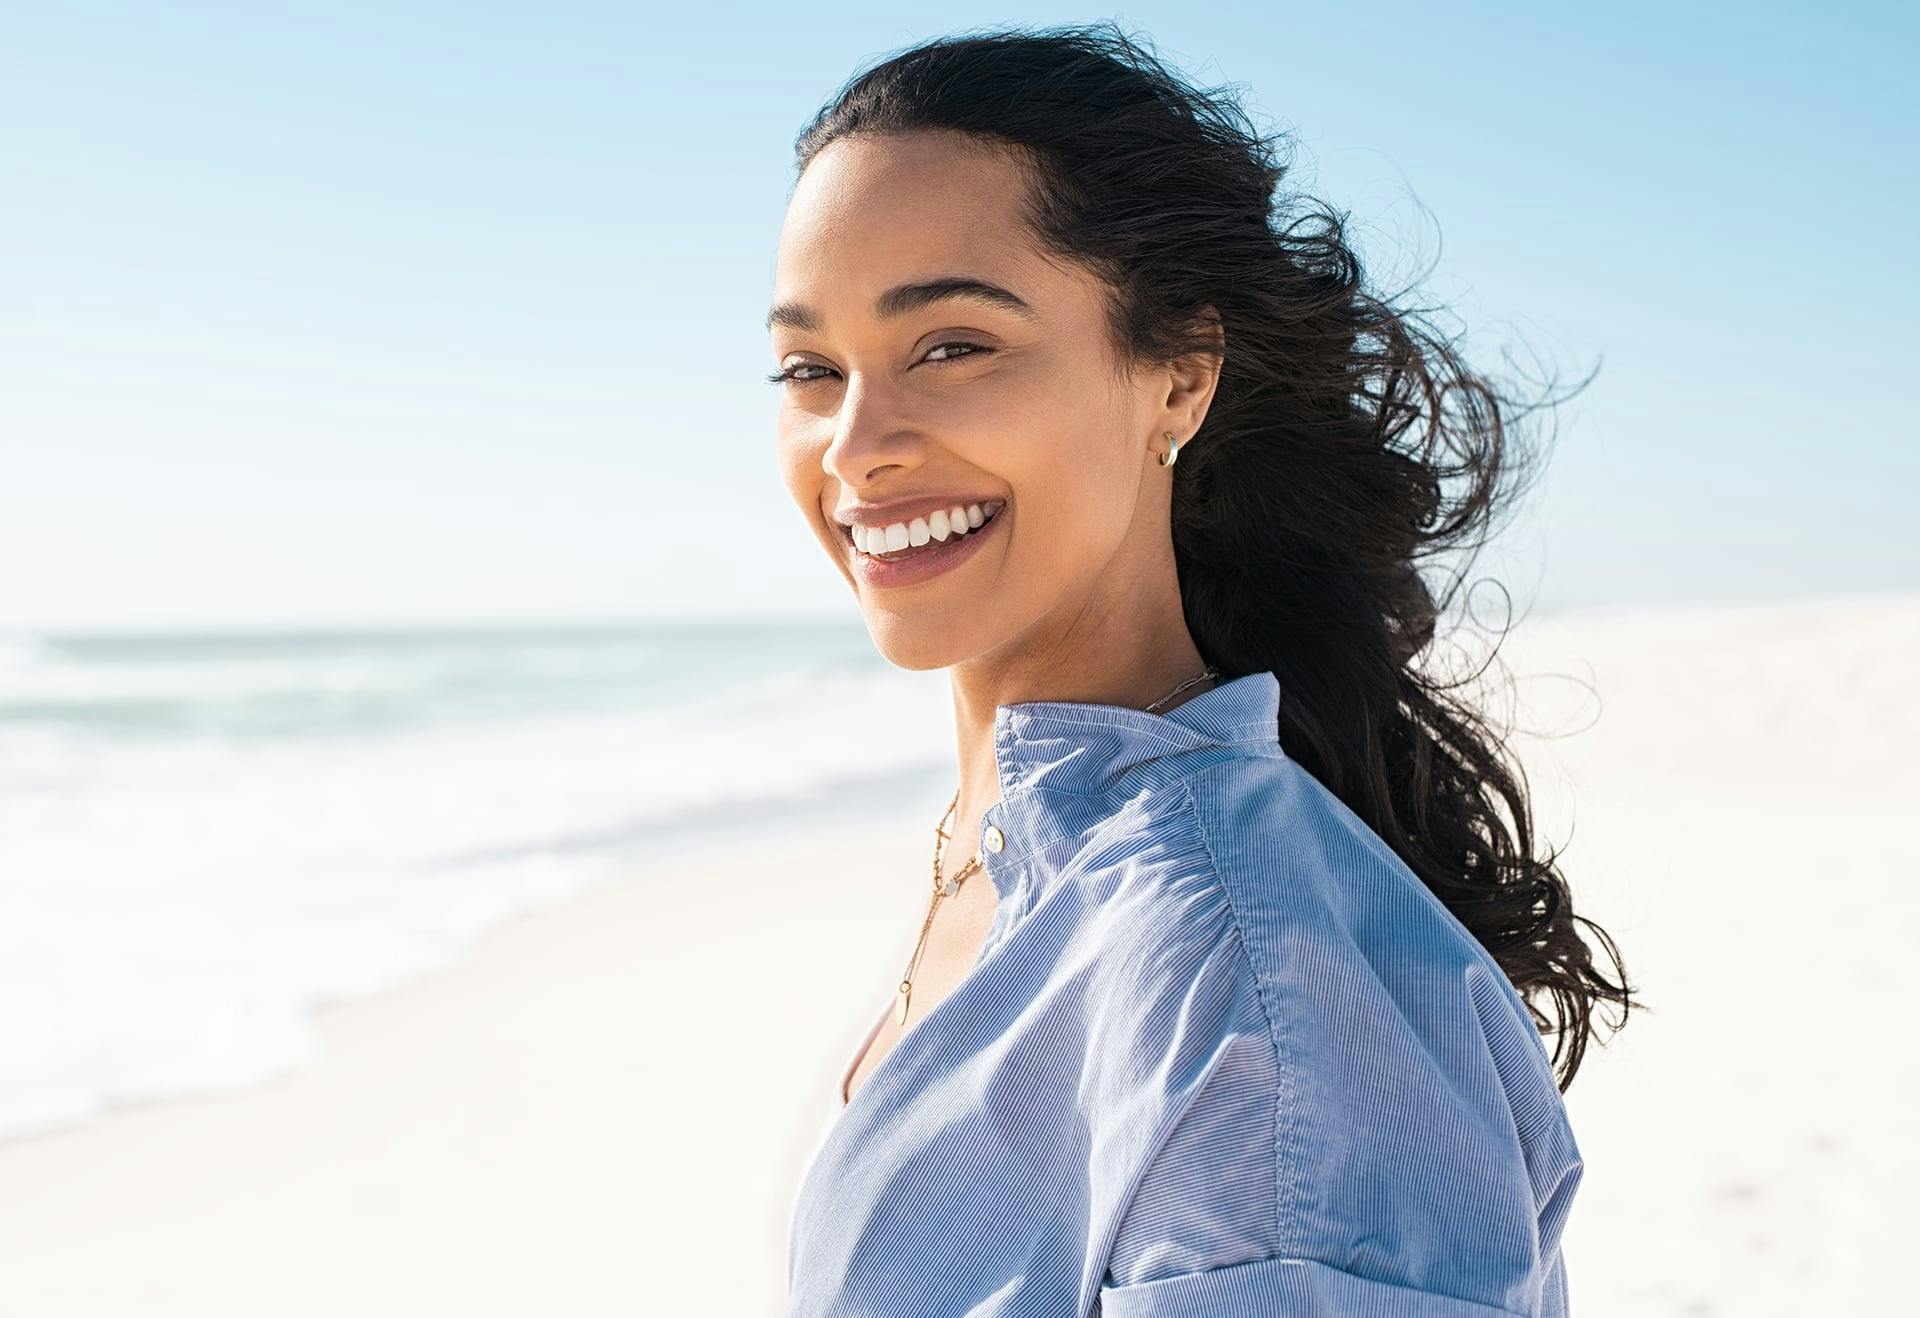 Woman with dark hair smiling on the beach